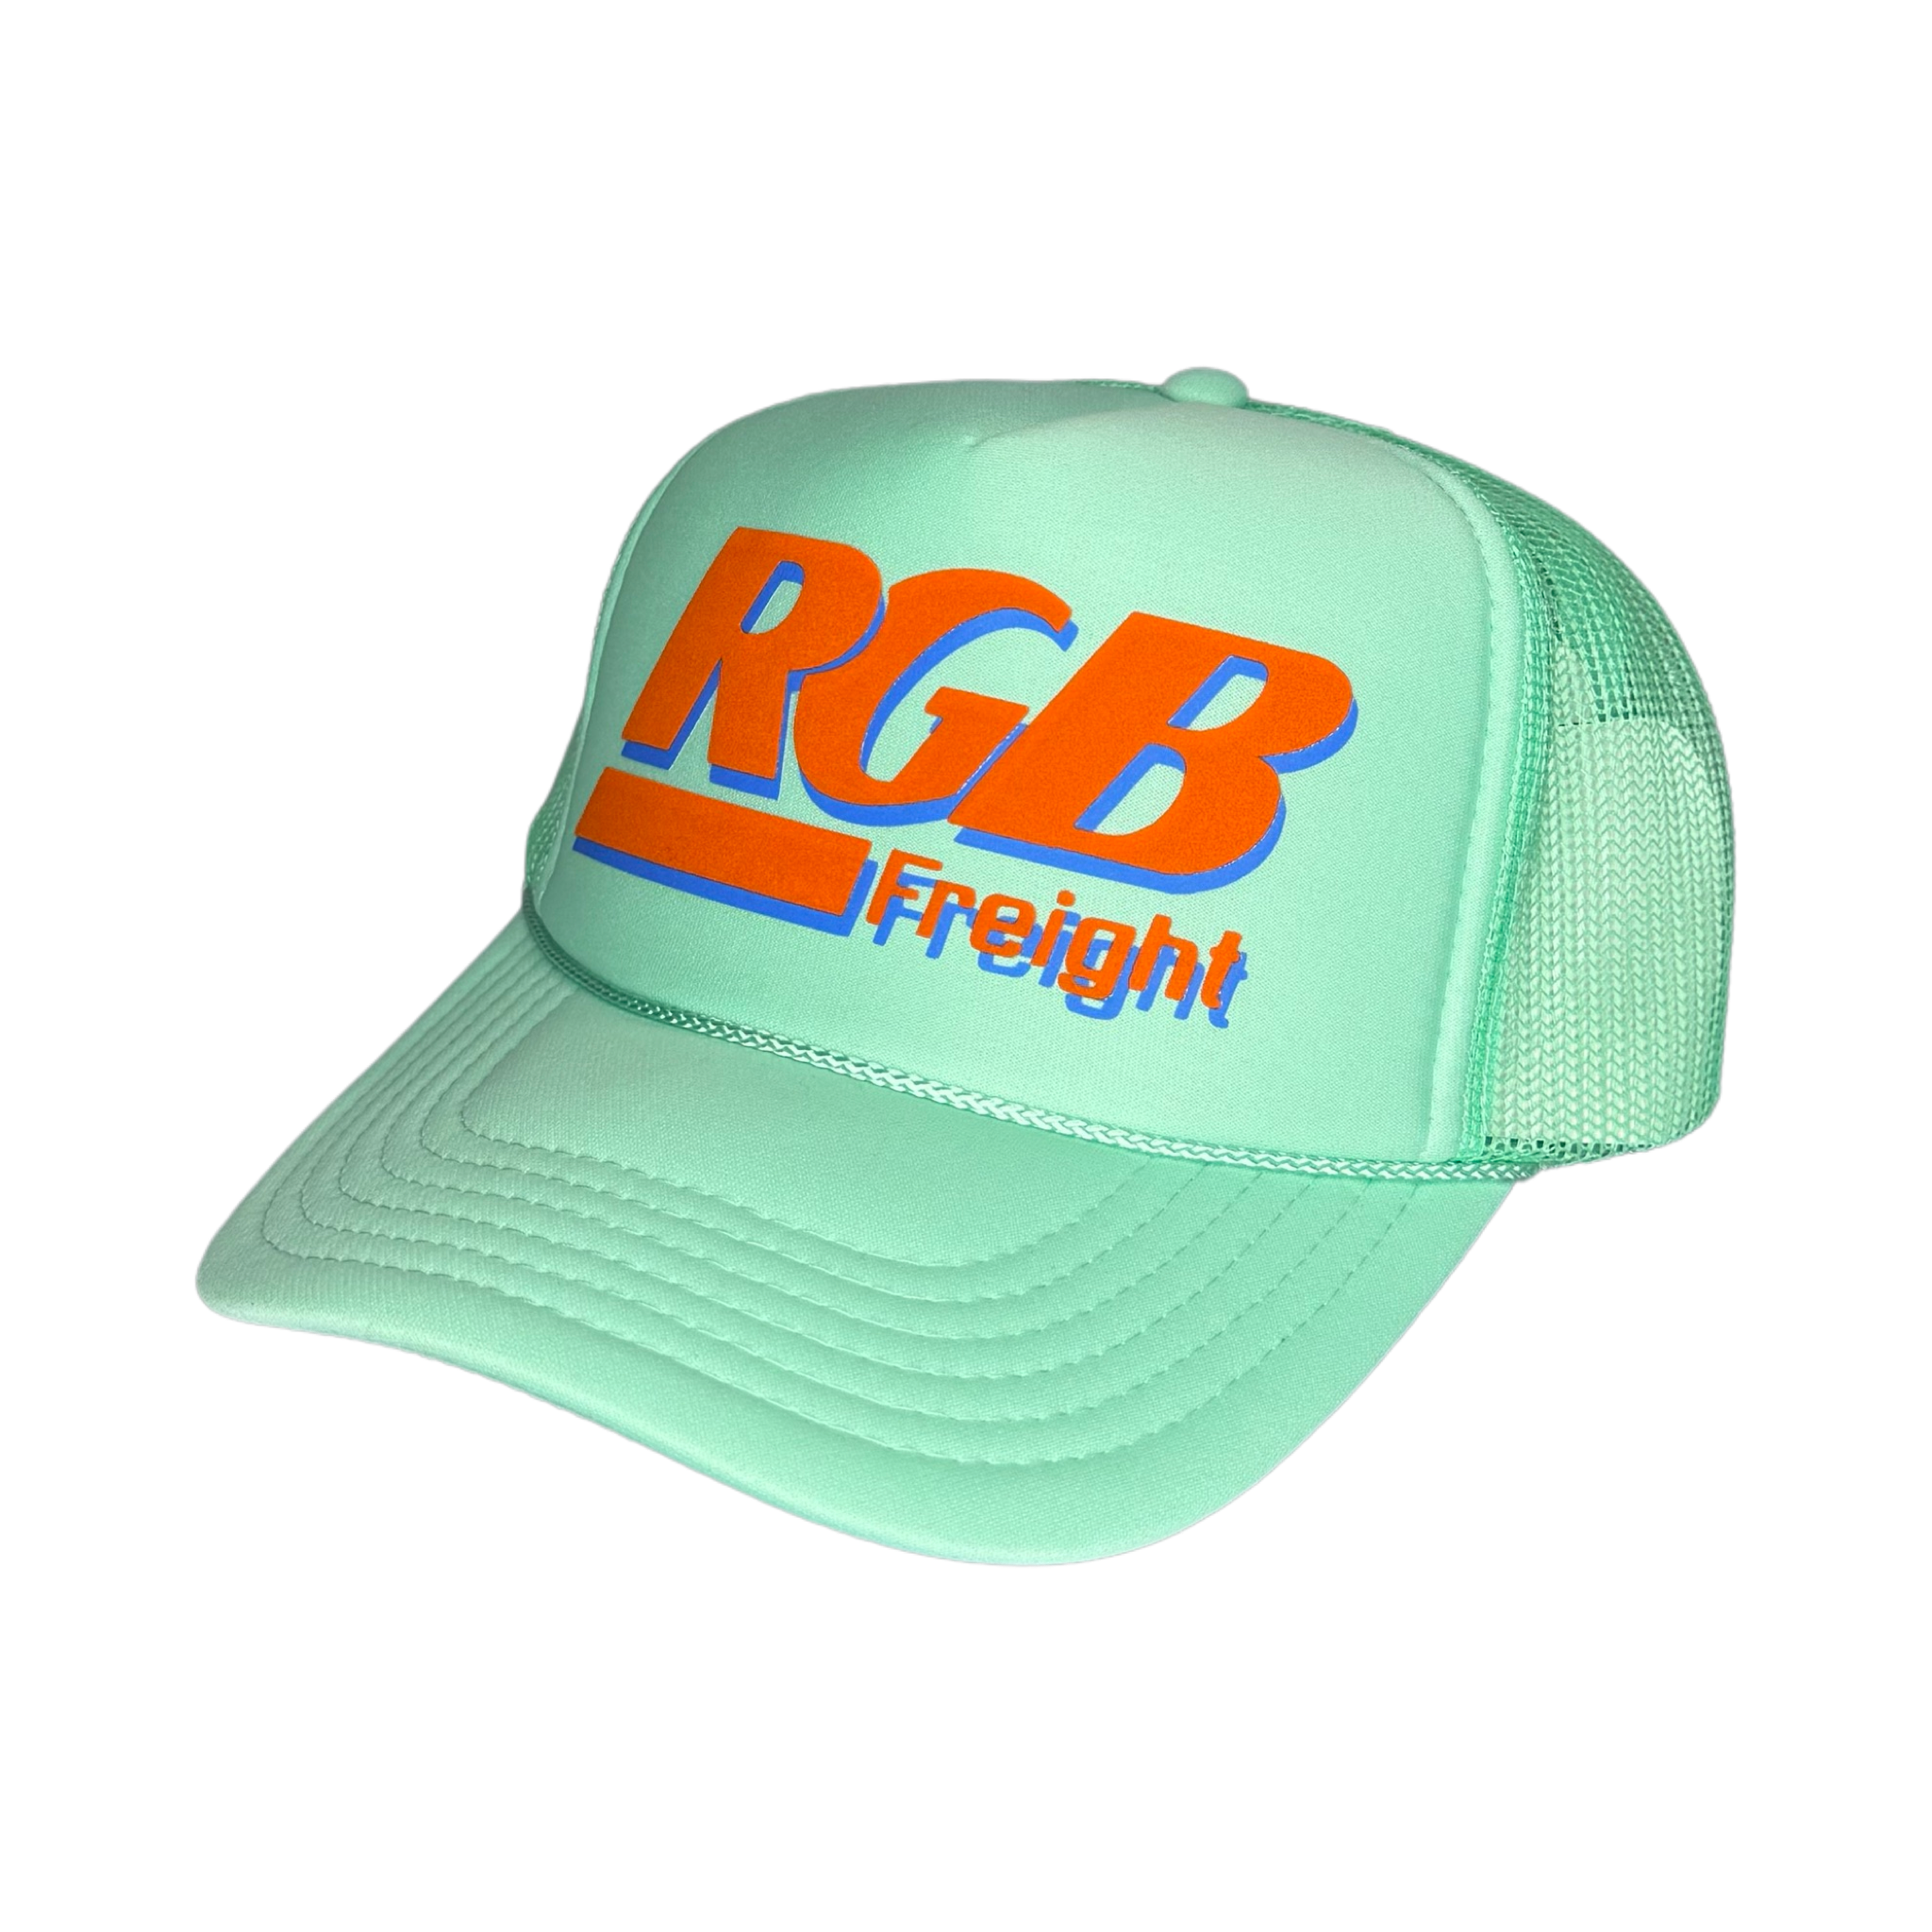 RGB FREIGHT TRUCKER HAT - REFLECTIVE 1 of 1